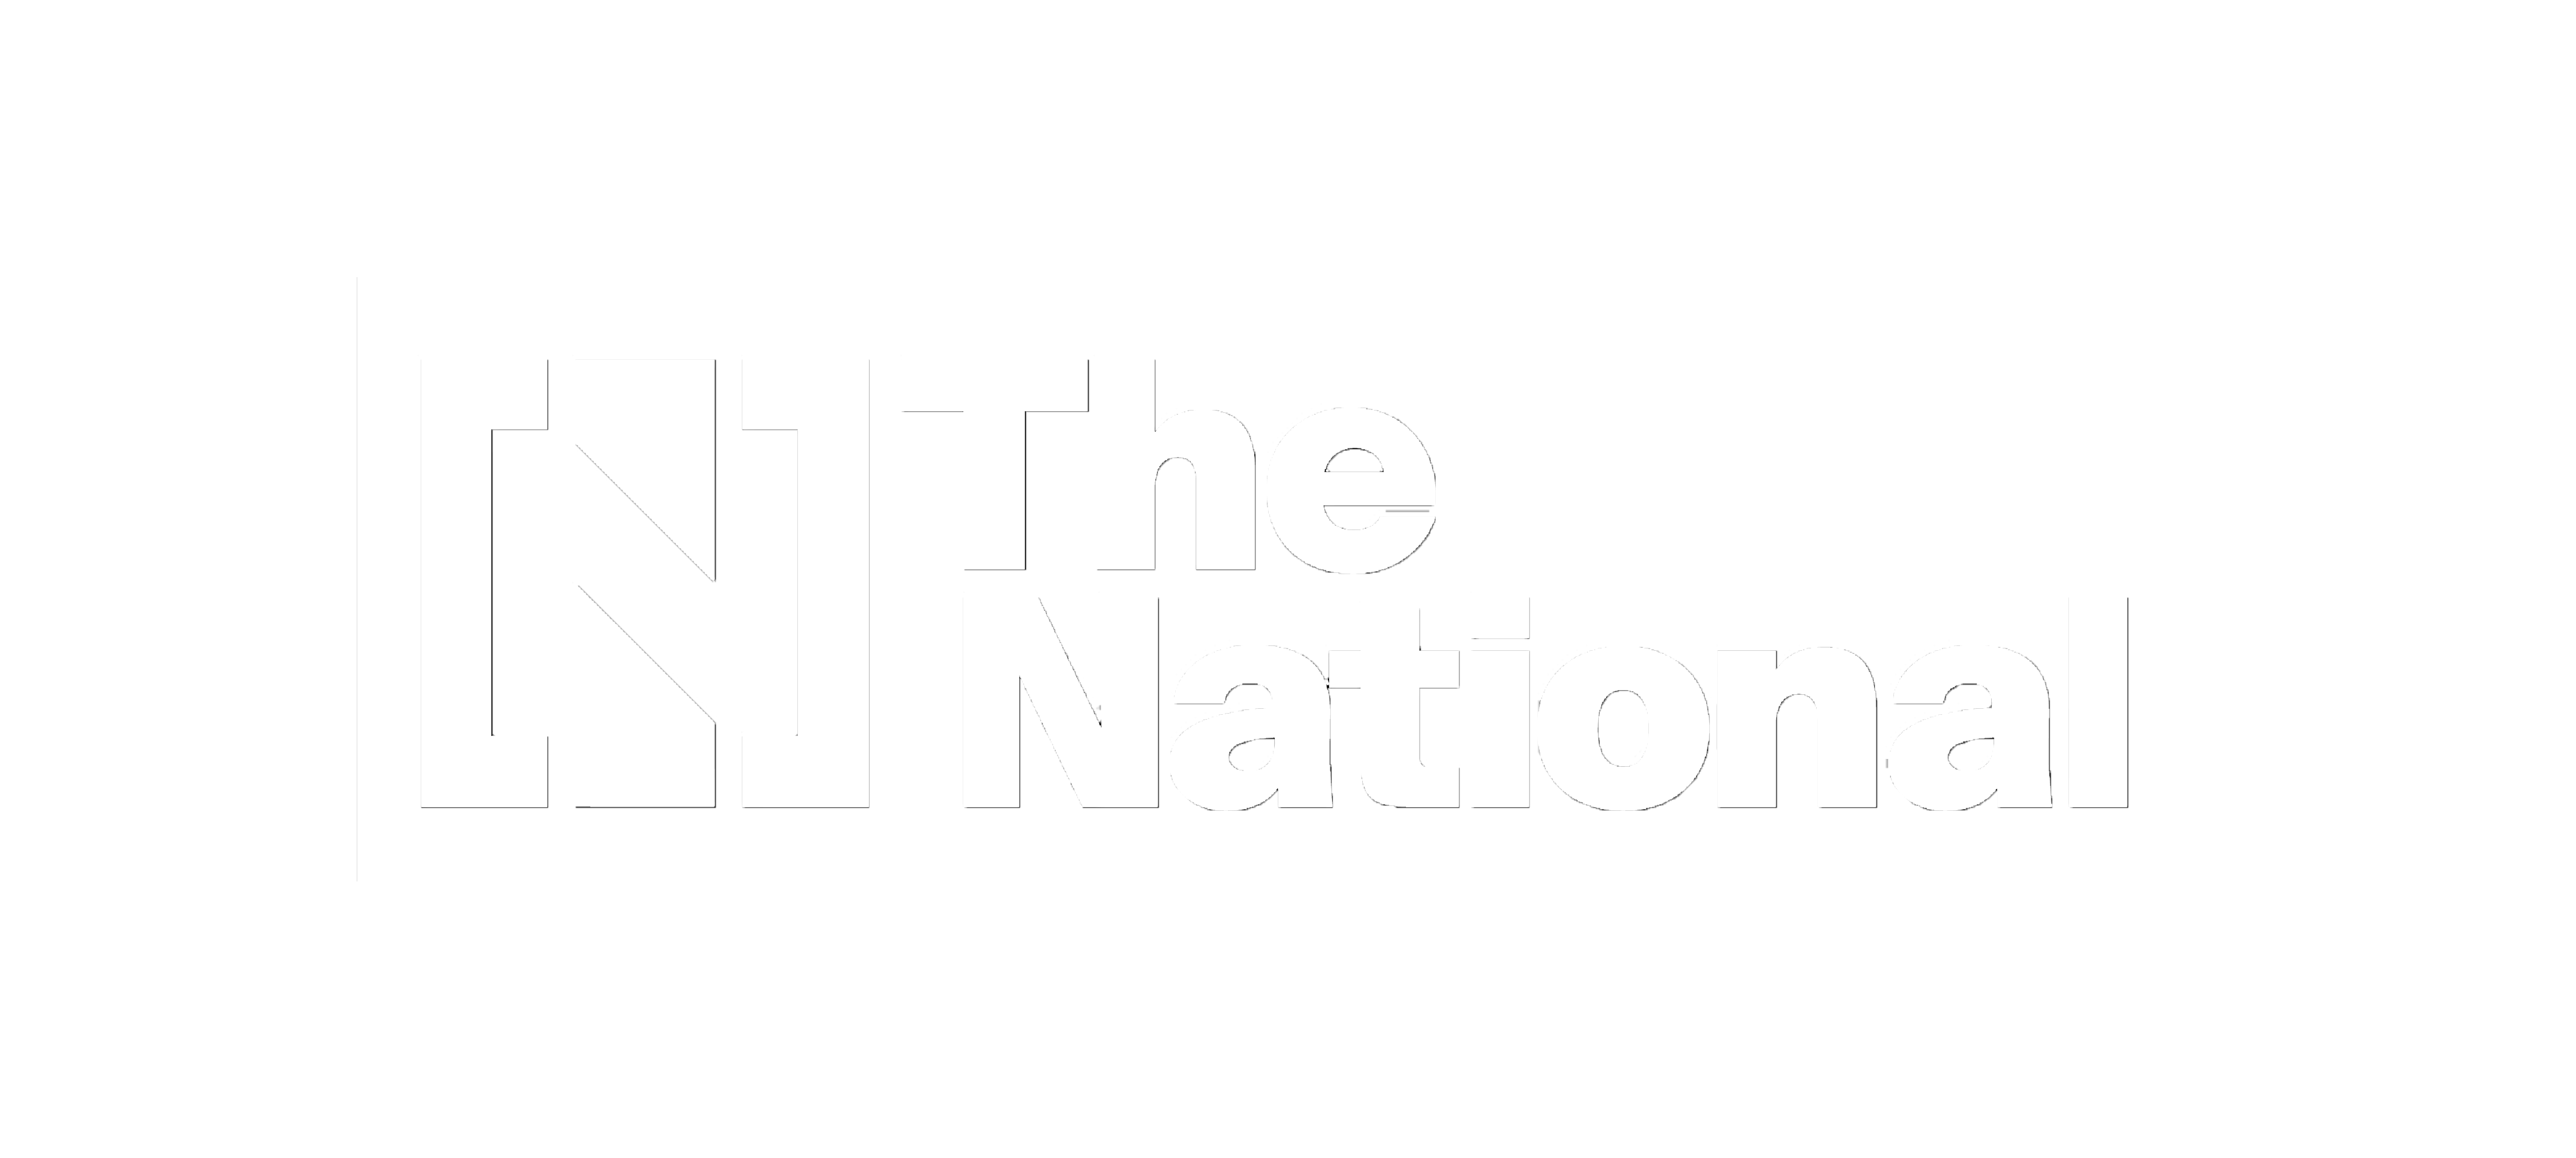 The National News